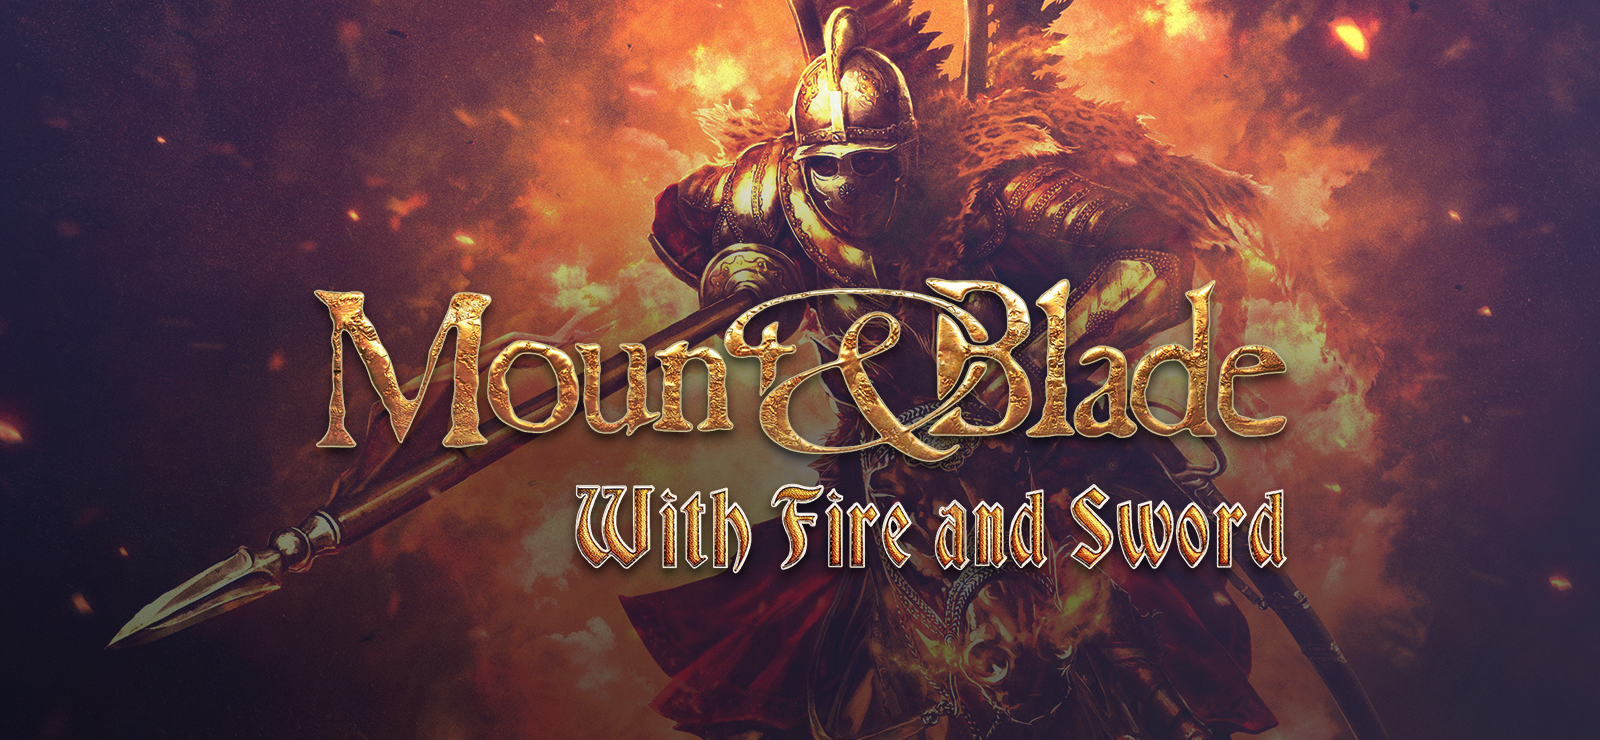 Mount and blade with fire and sword русификатор для steam фото 63